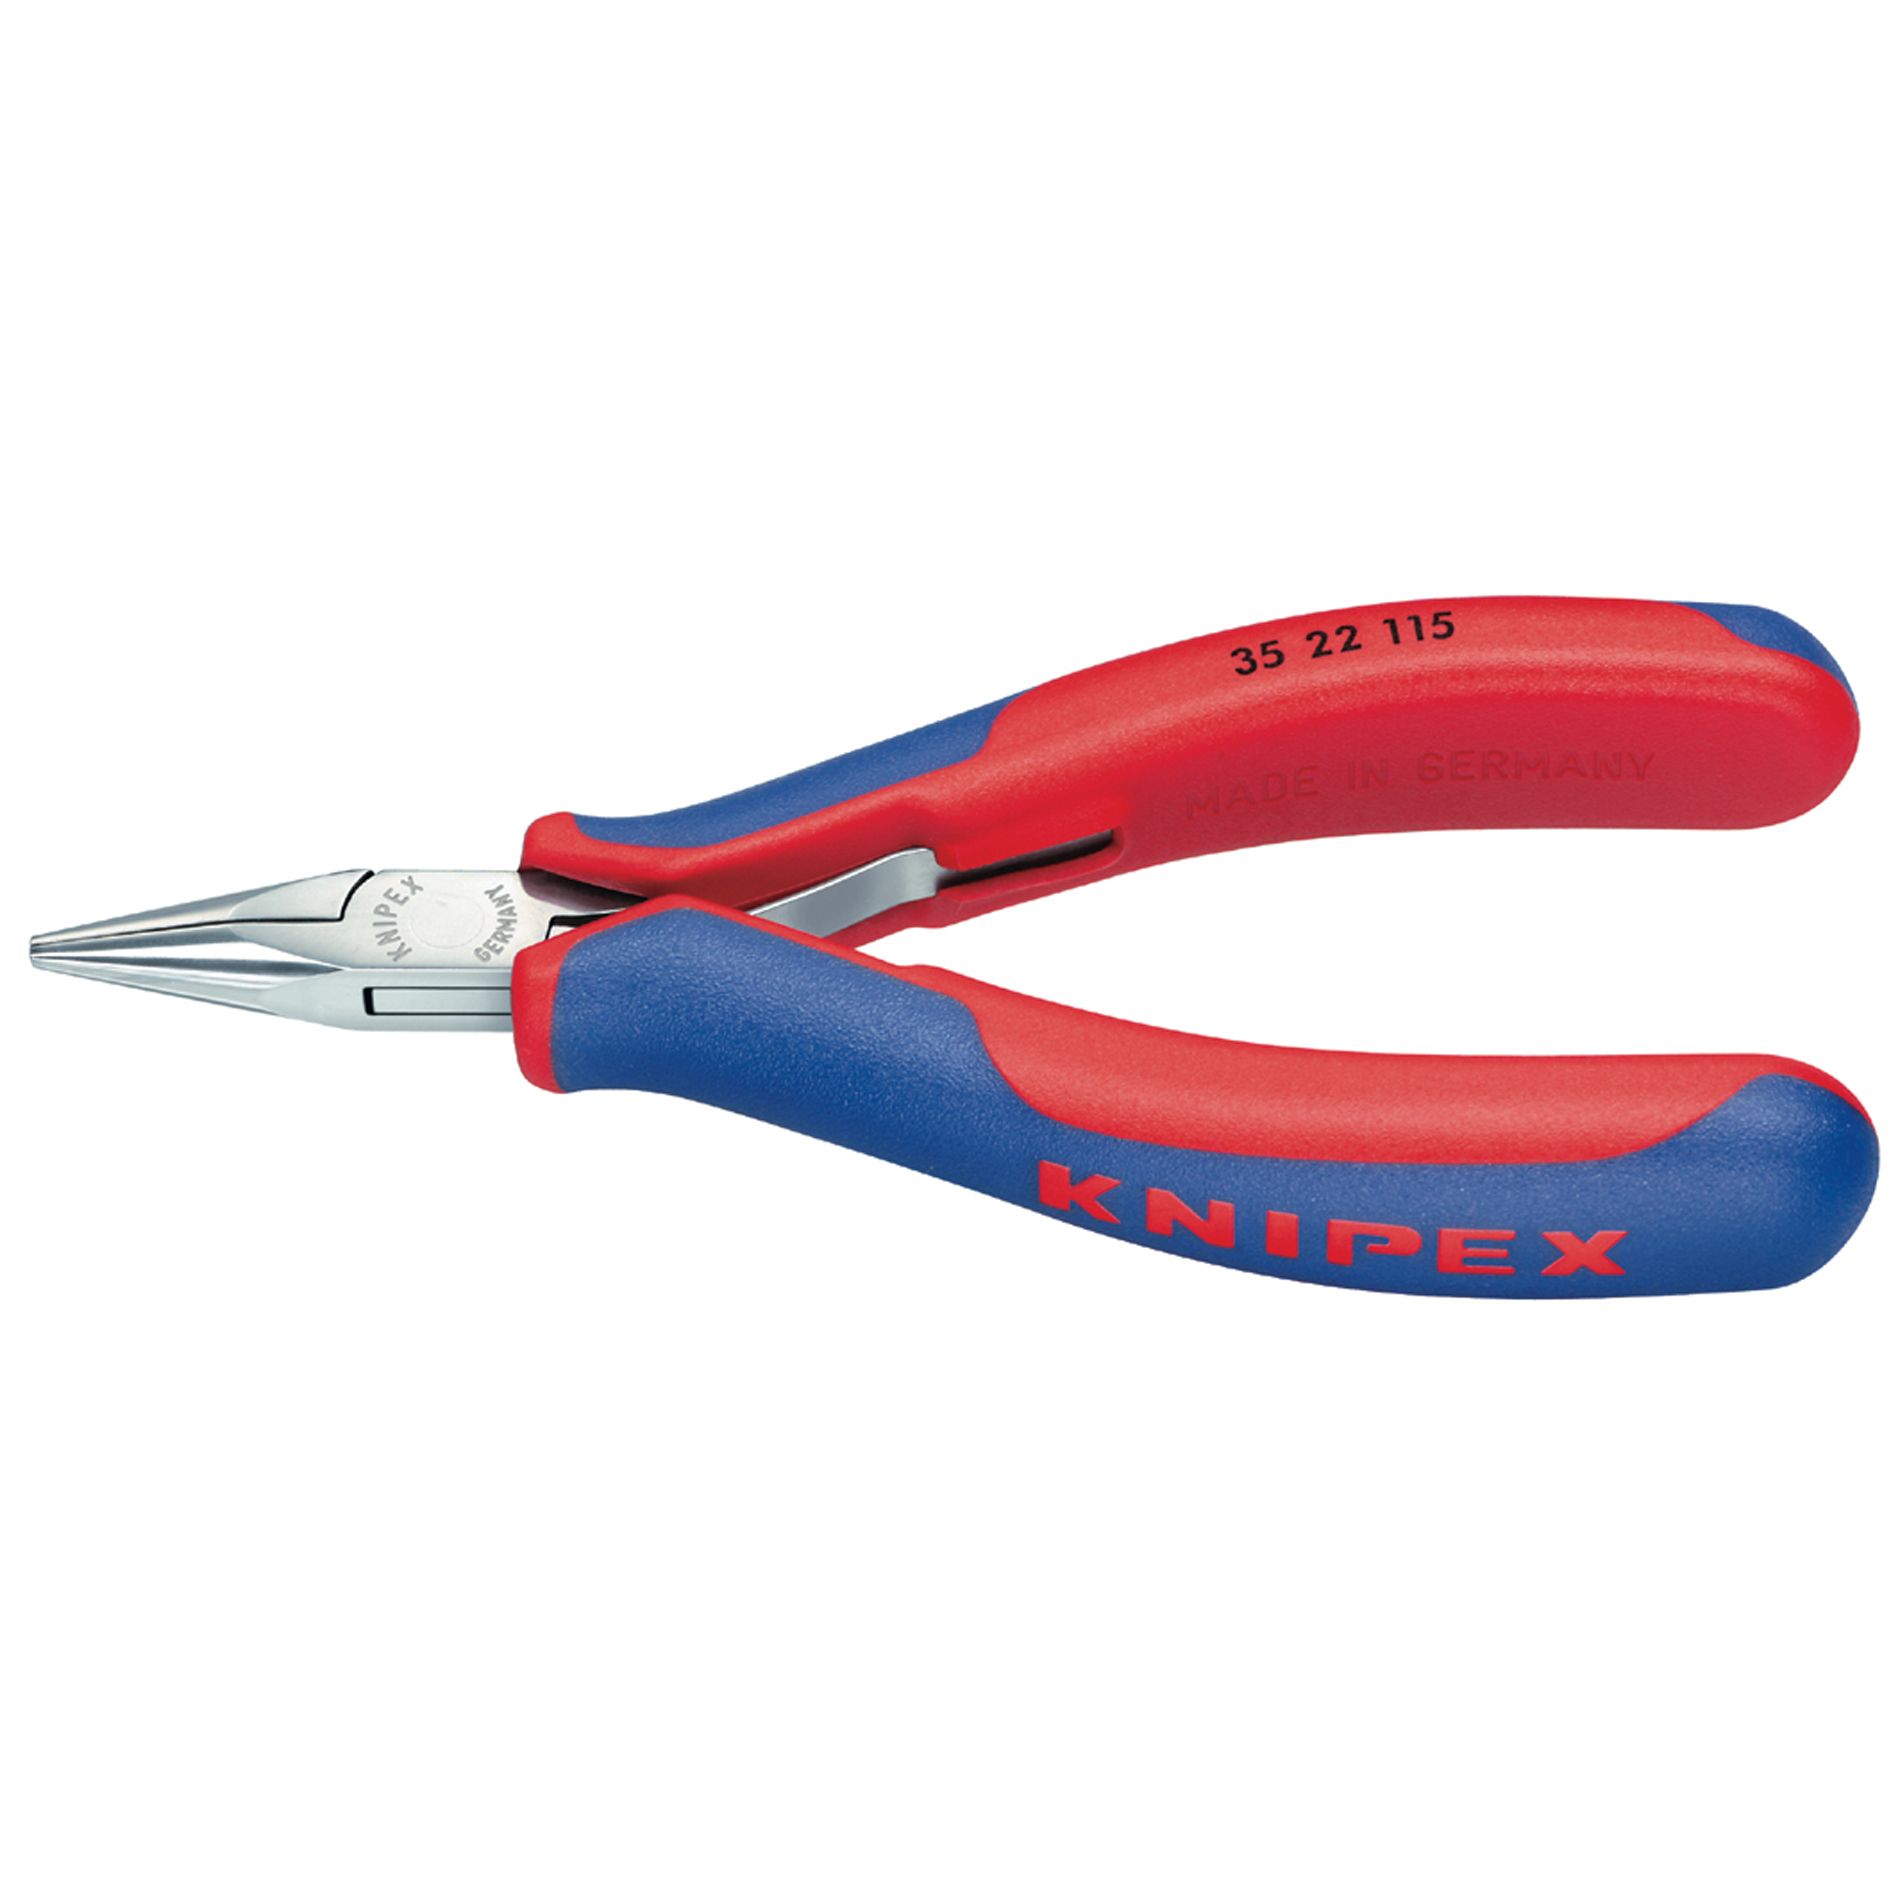 Knipex 4 1/2" Electronics Pliers - Half Round Tips